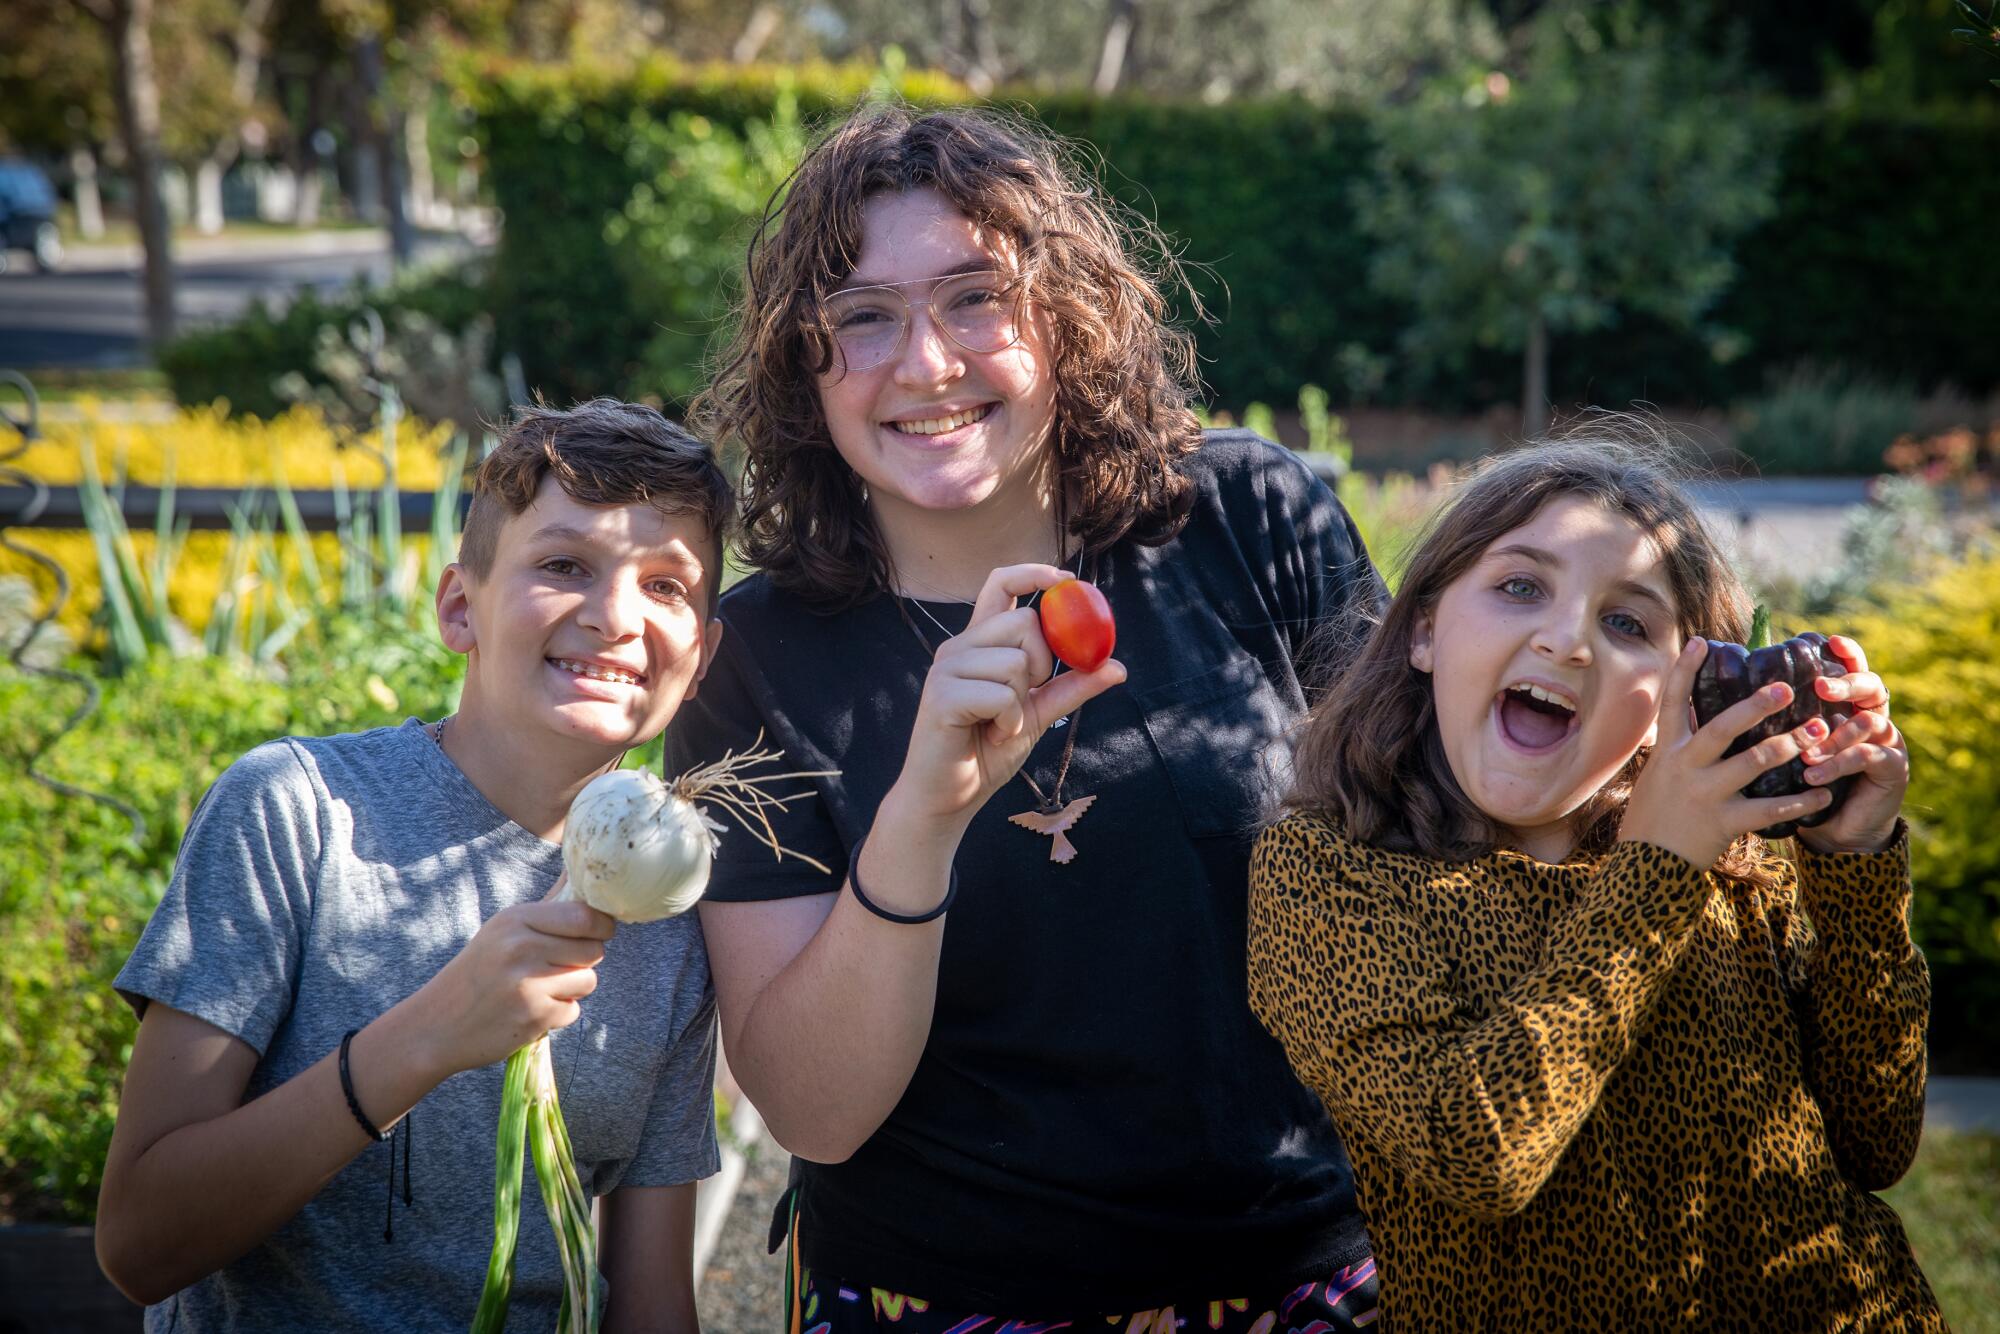 The Matloff kids — Daniel, Isabelle and Edie — smile as they show off fresh-picked veggies.